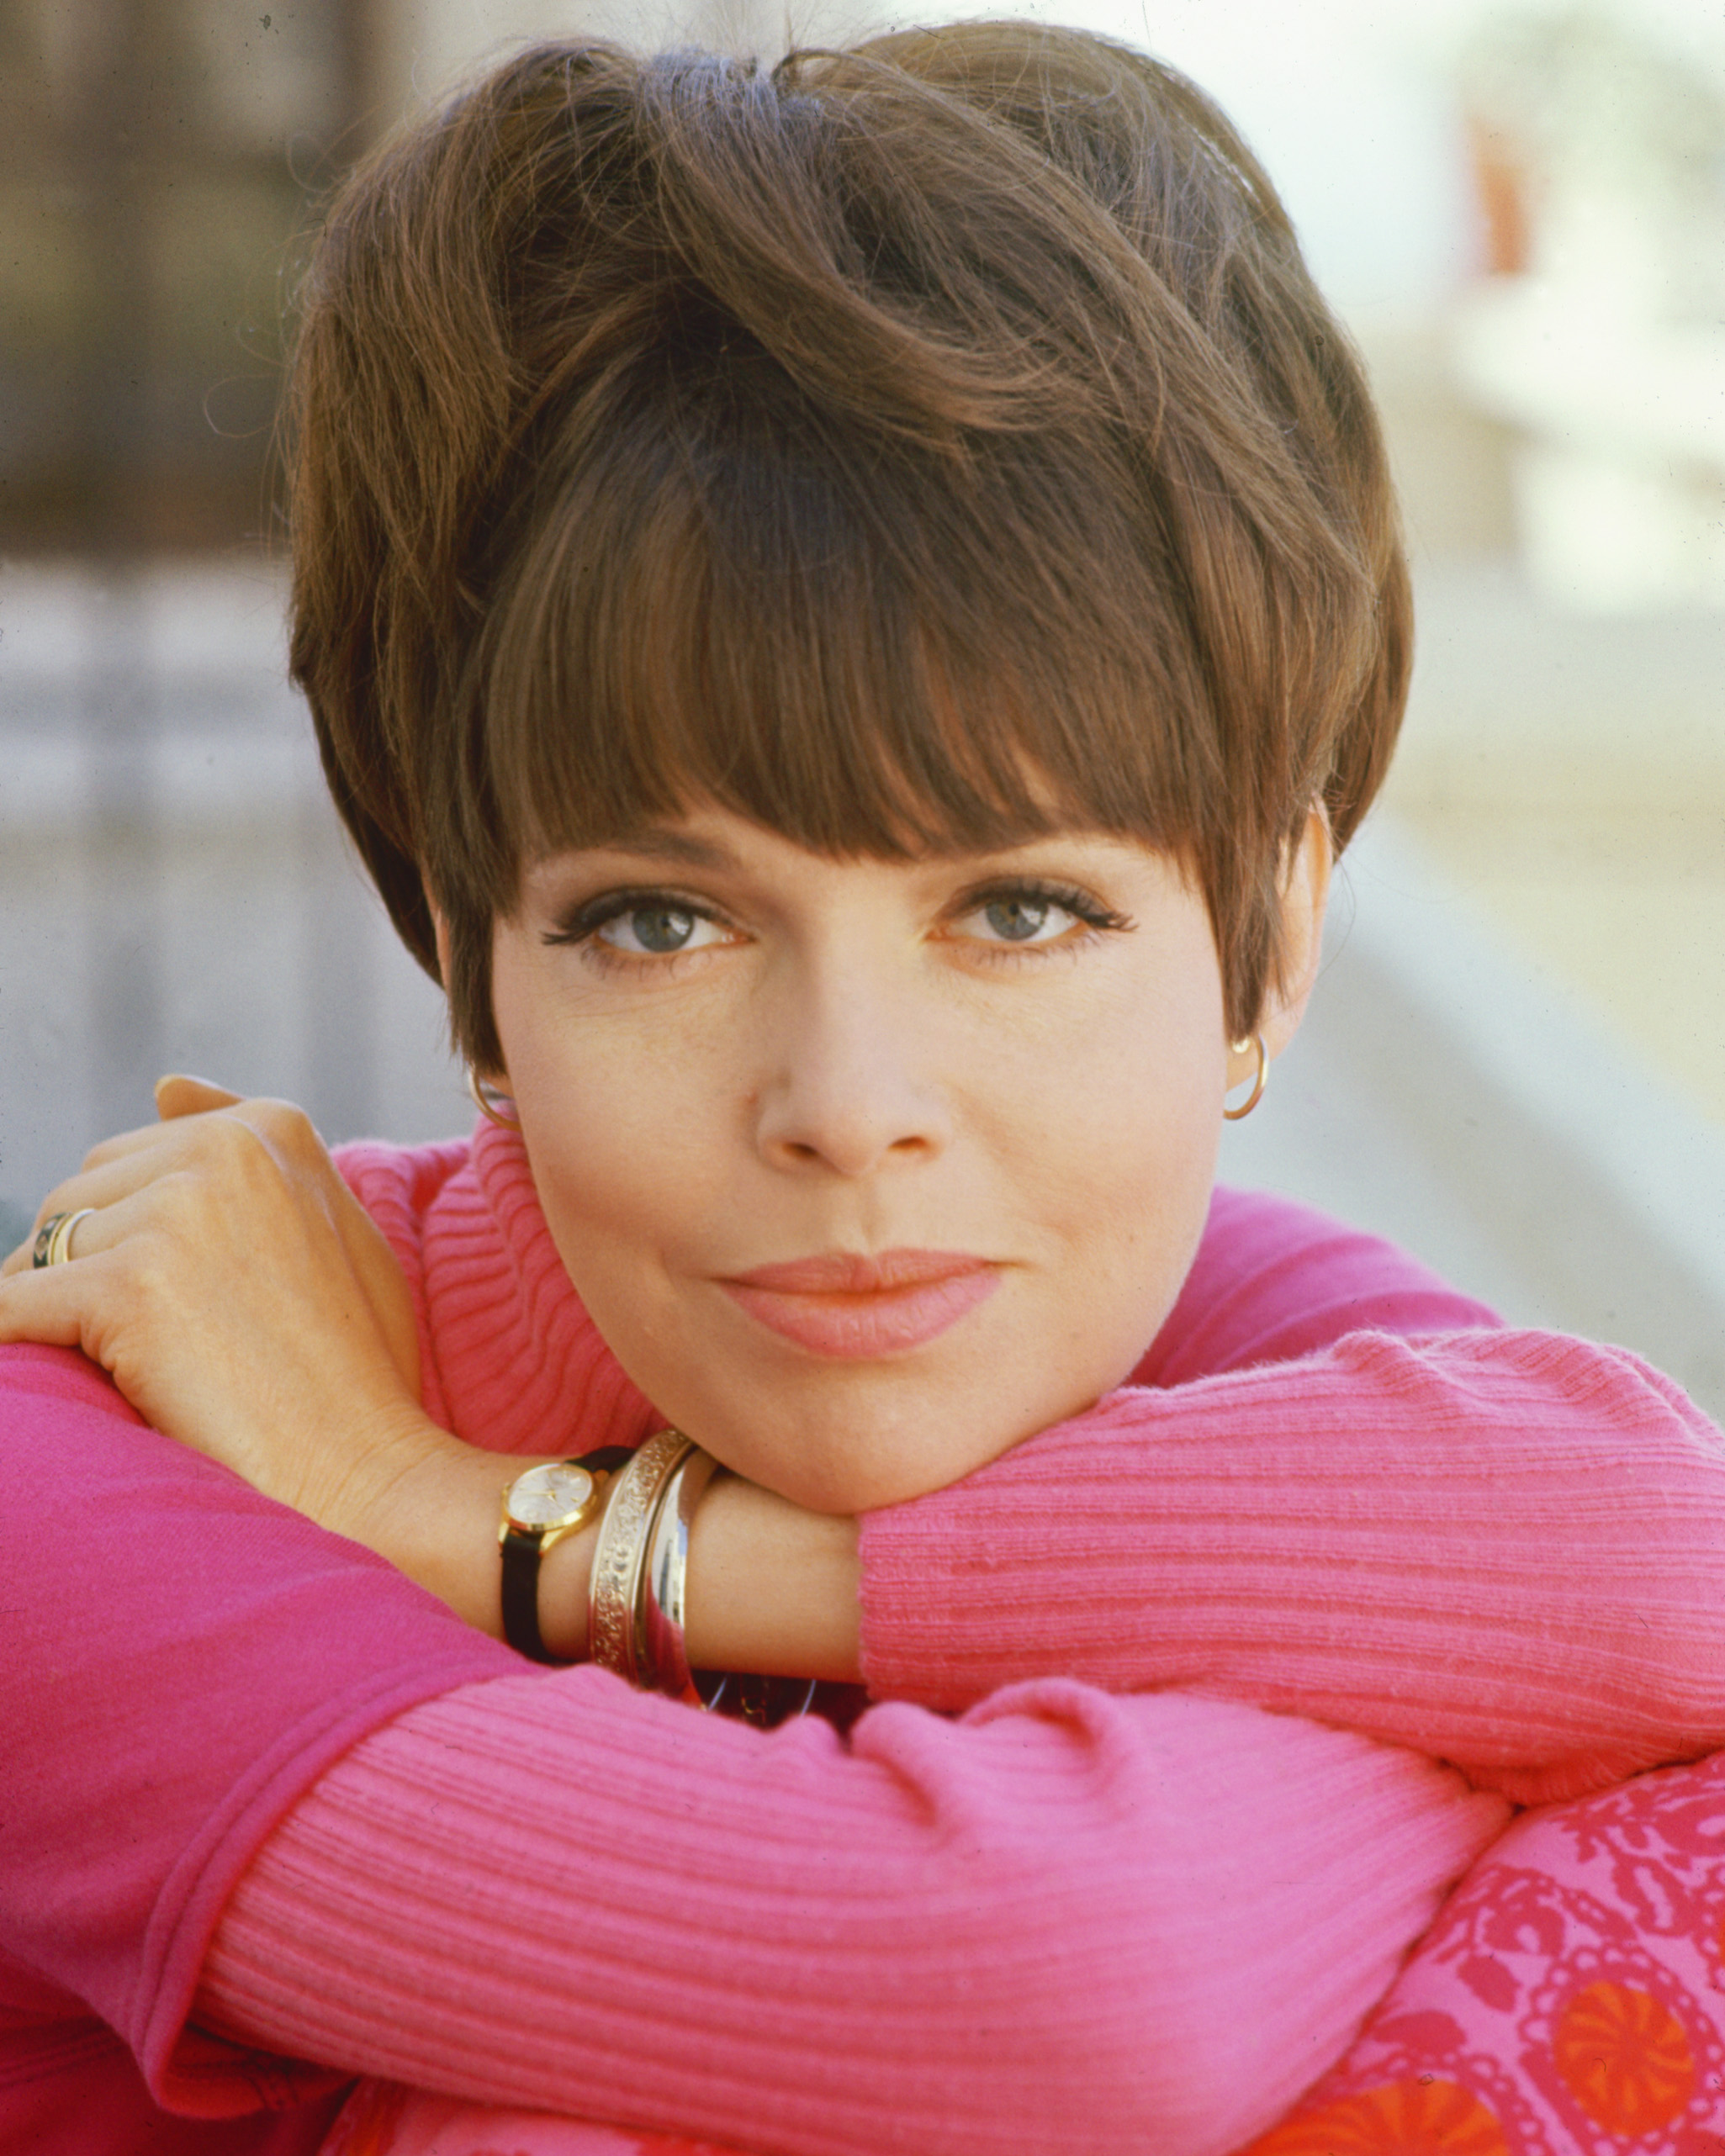 Barbara Feldon in a publicity portrait for "Get Smart," circa 1965 | Source: Getty Images